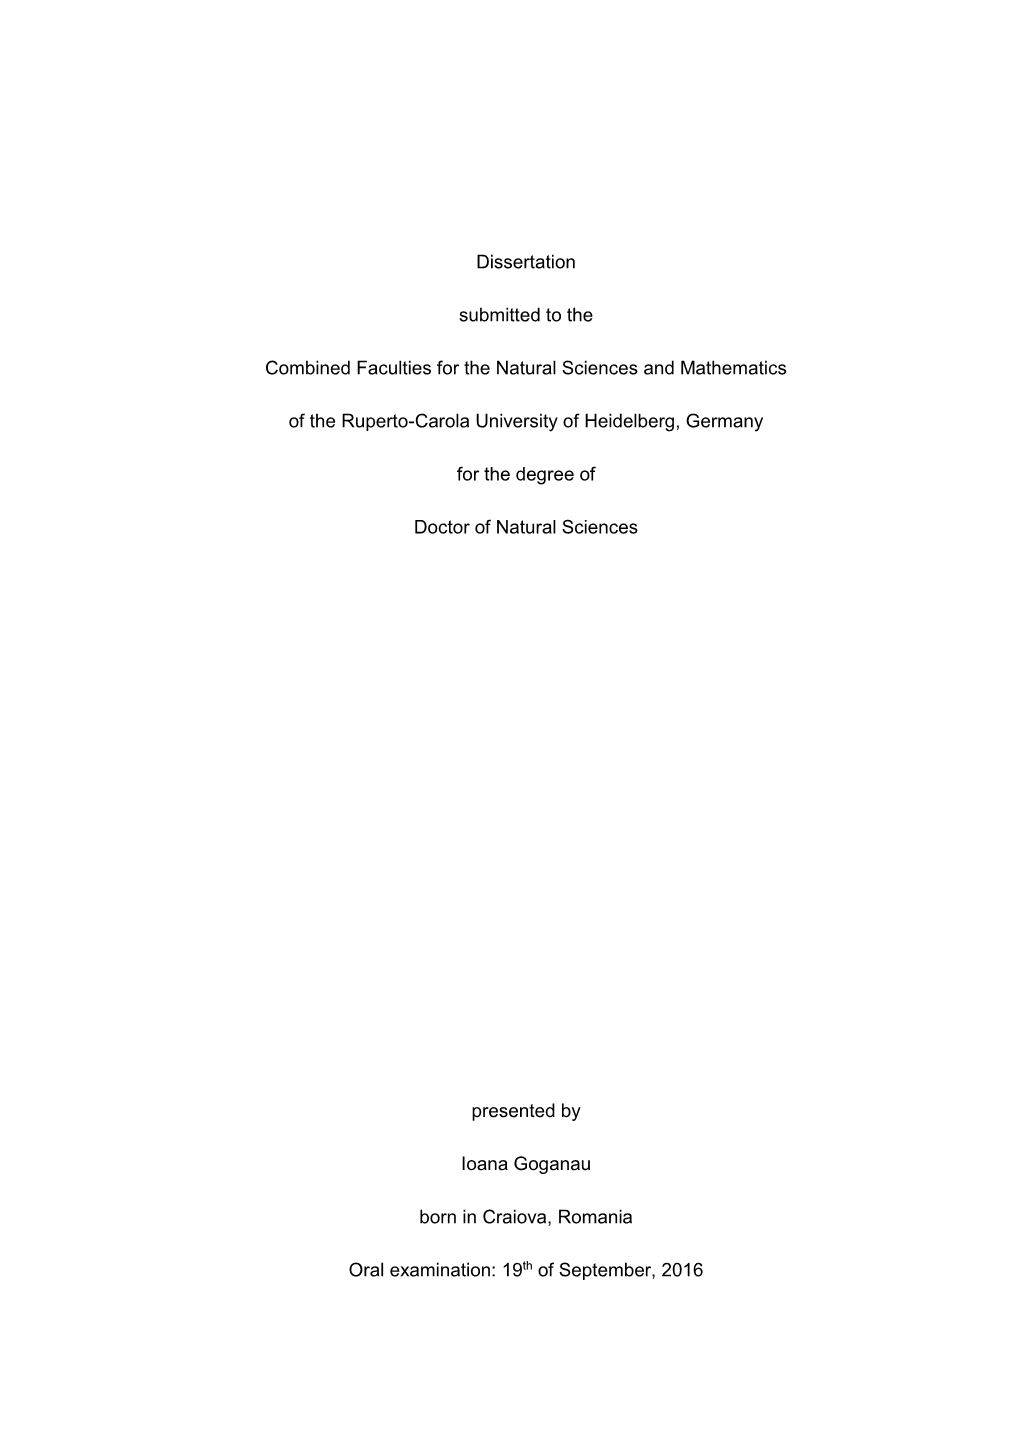 Dissertation Submitted to the Combined Faculties for the Natural Sciences and Mathematics of the Ruperto-Carola University of He